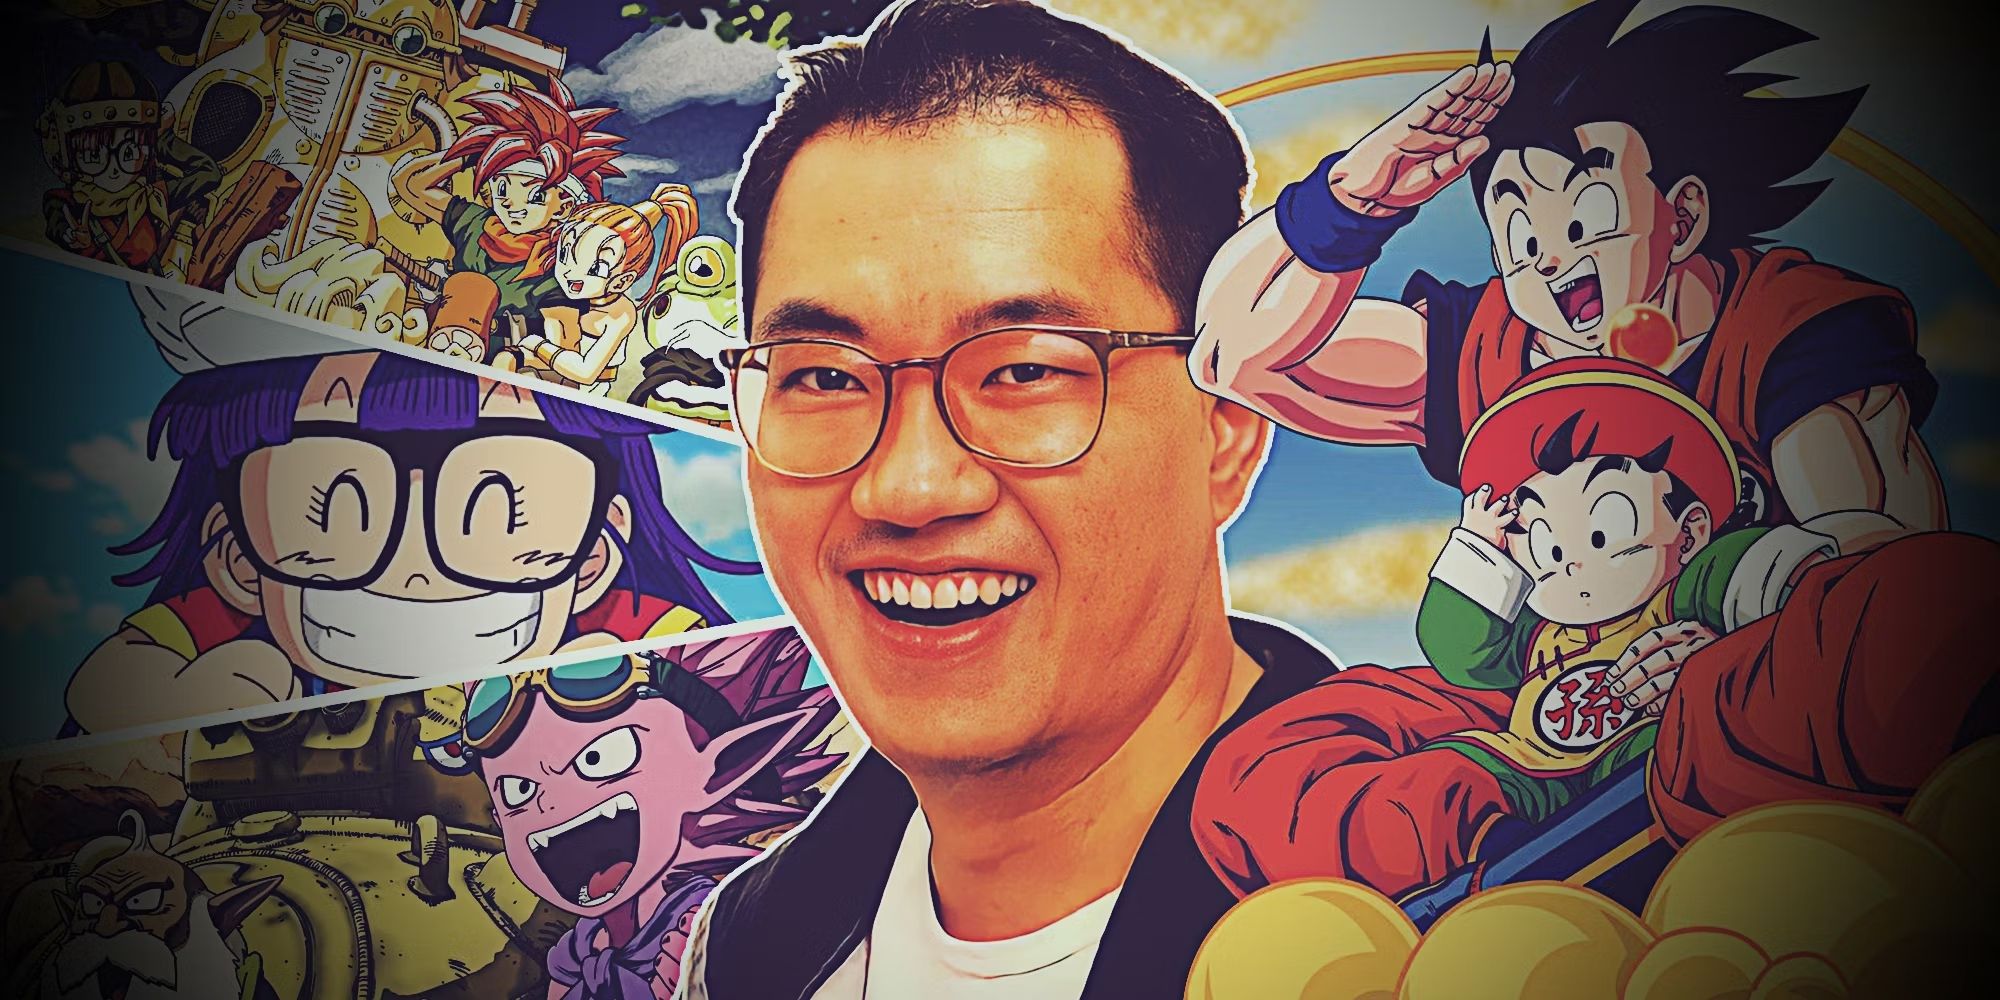 22-akira-toriyama-may-be-gone-but-his-work-will-live-on-forever-_1_.jpg